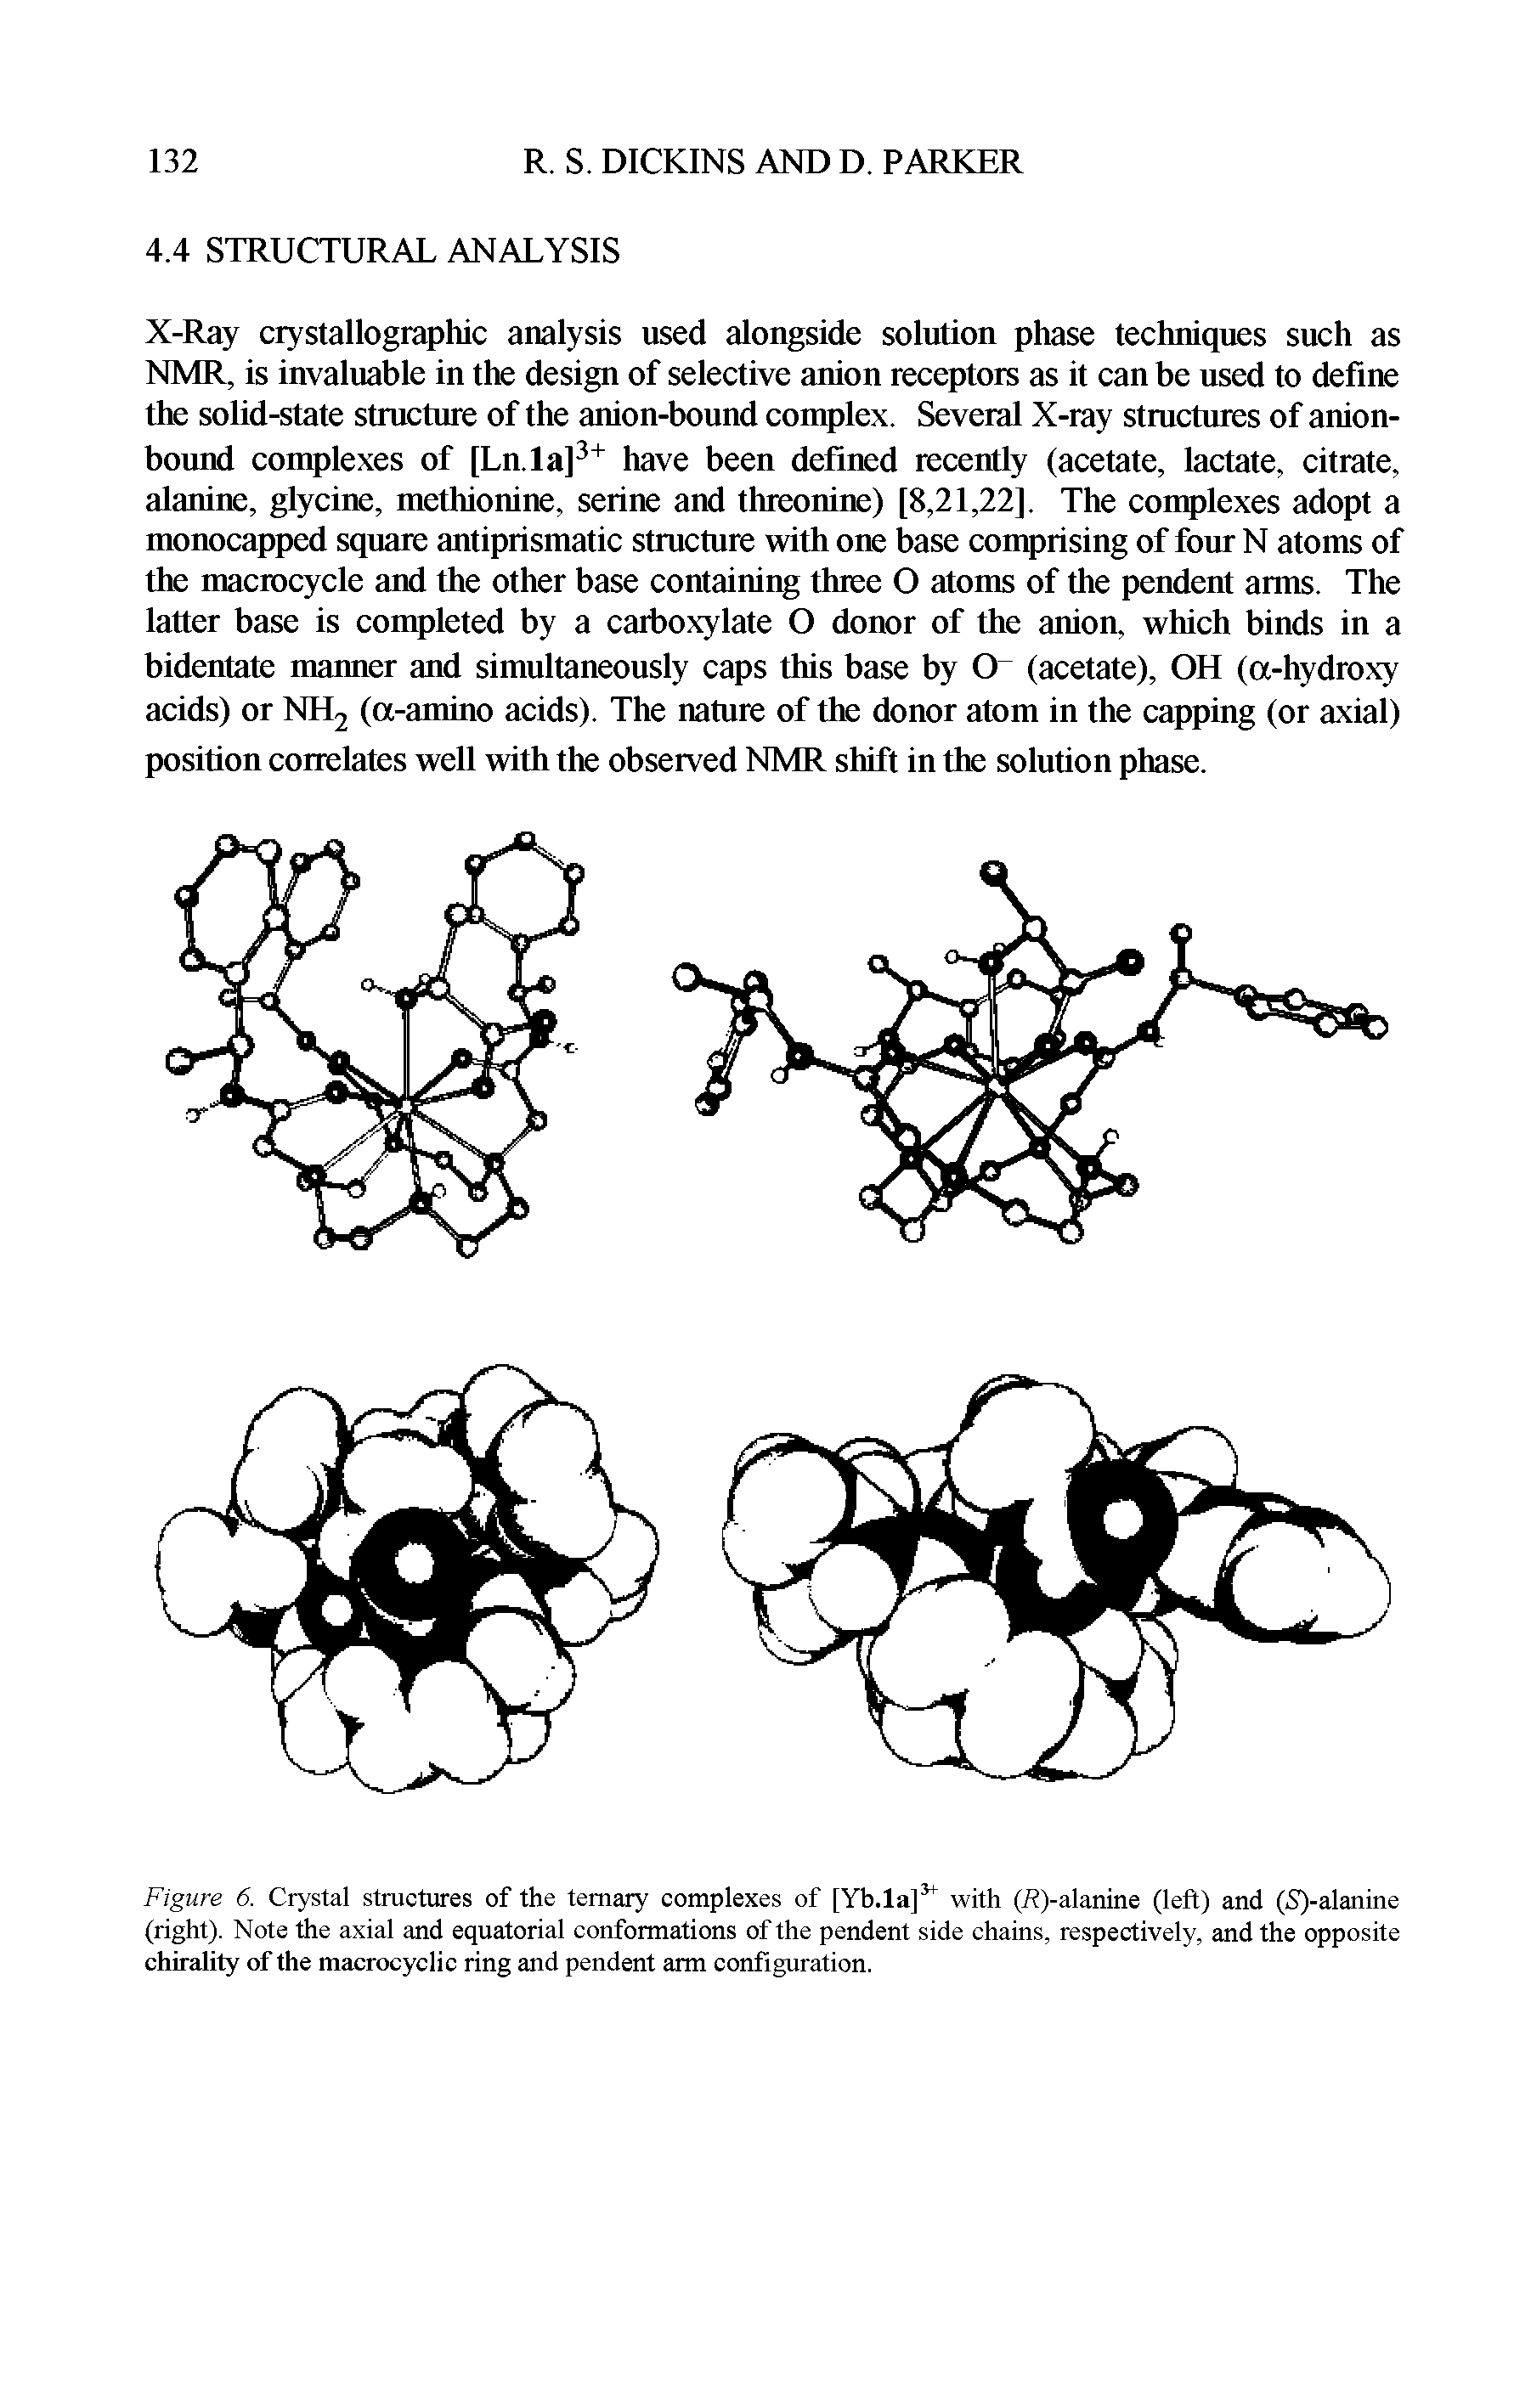 Figure 6. Crystal structures of the ternary complexes of [Yb.la]3 with (R)-alanine (left) and (<S)-alanine (right). Note the axial and equatorial conformations of the pendent side chains, respectively, and the opposite chirality of the macrocyclic ring and pendent arm configuration.